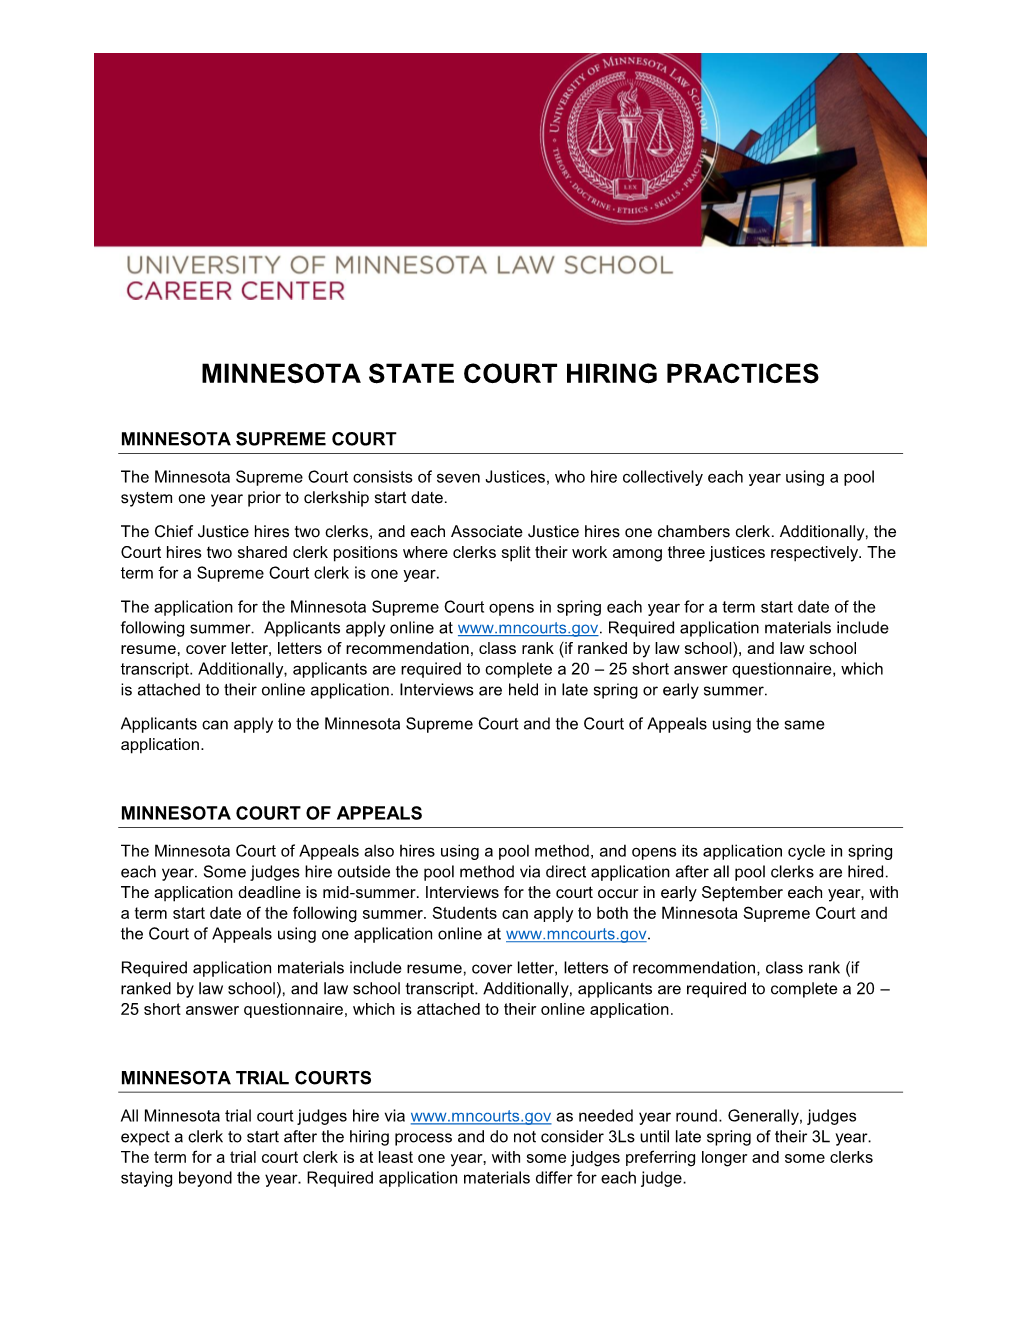 Minnesota State Court Hiring Practices